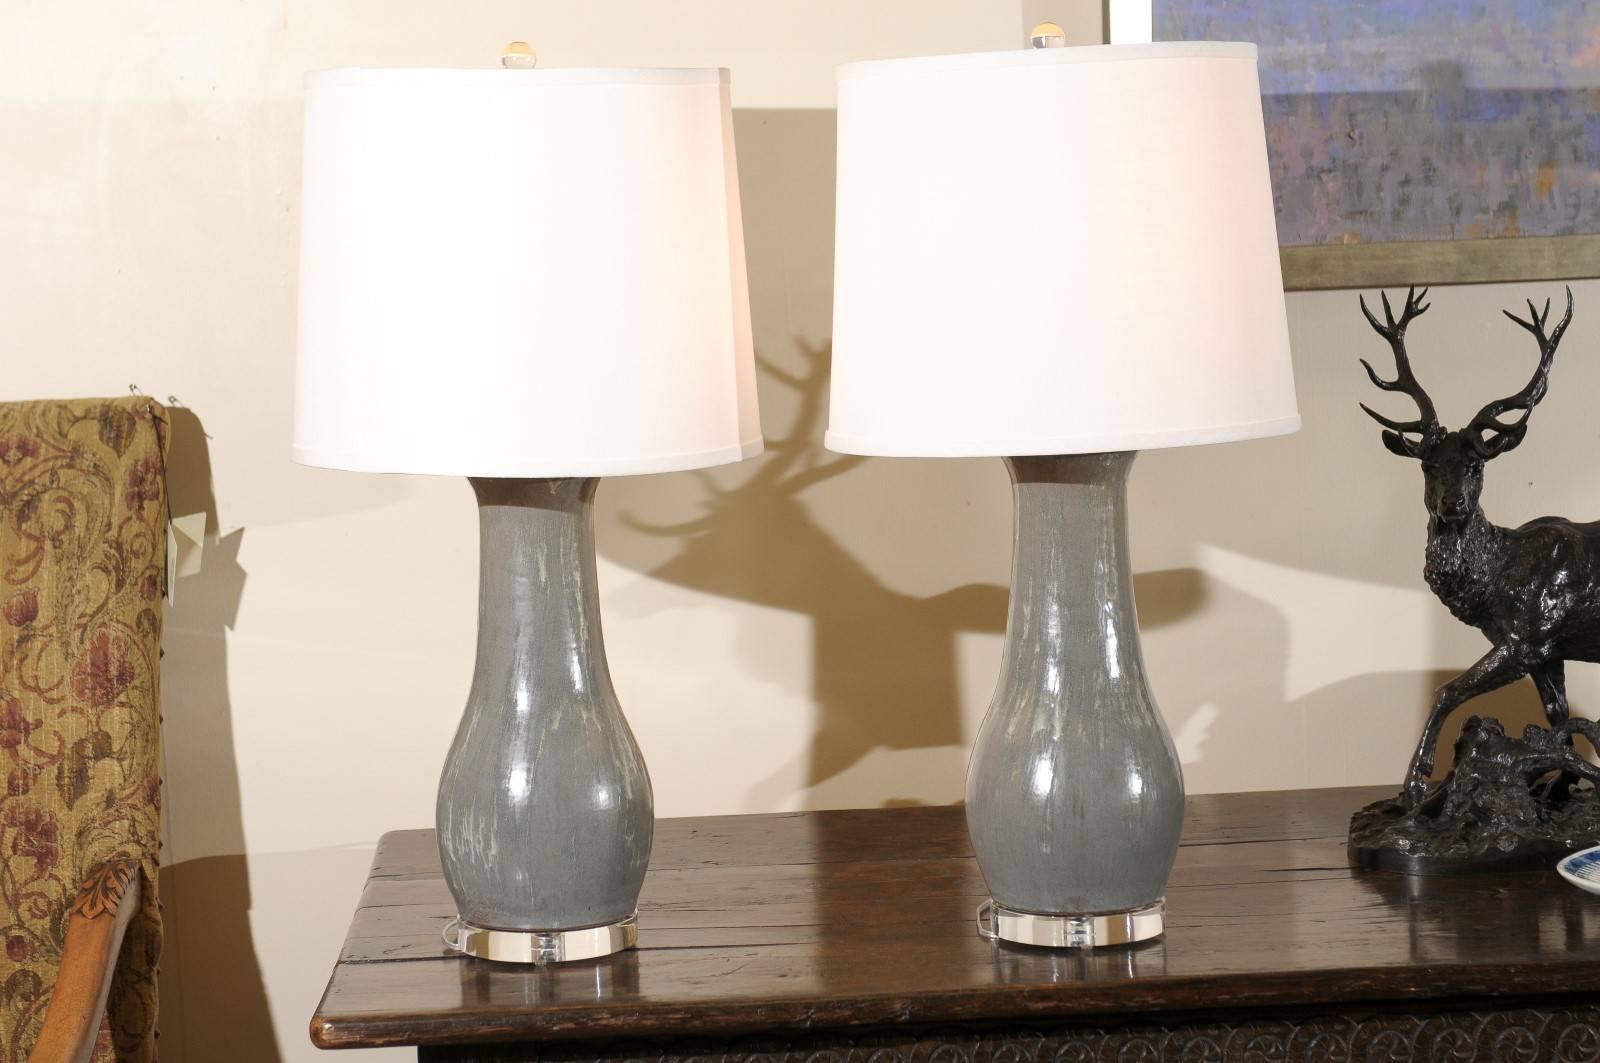 These lamps are made by North Georgia Potter, Charlie West. The lamps come in other shapes and sizes. The shades are included with this pair of lamps. Each lamp is hand thrown and glazed by the potter.
 